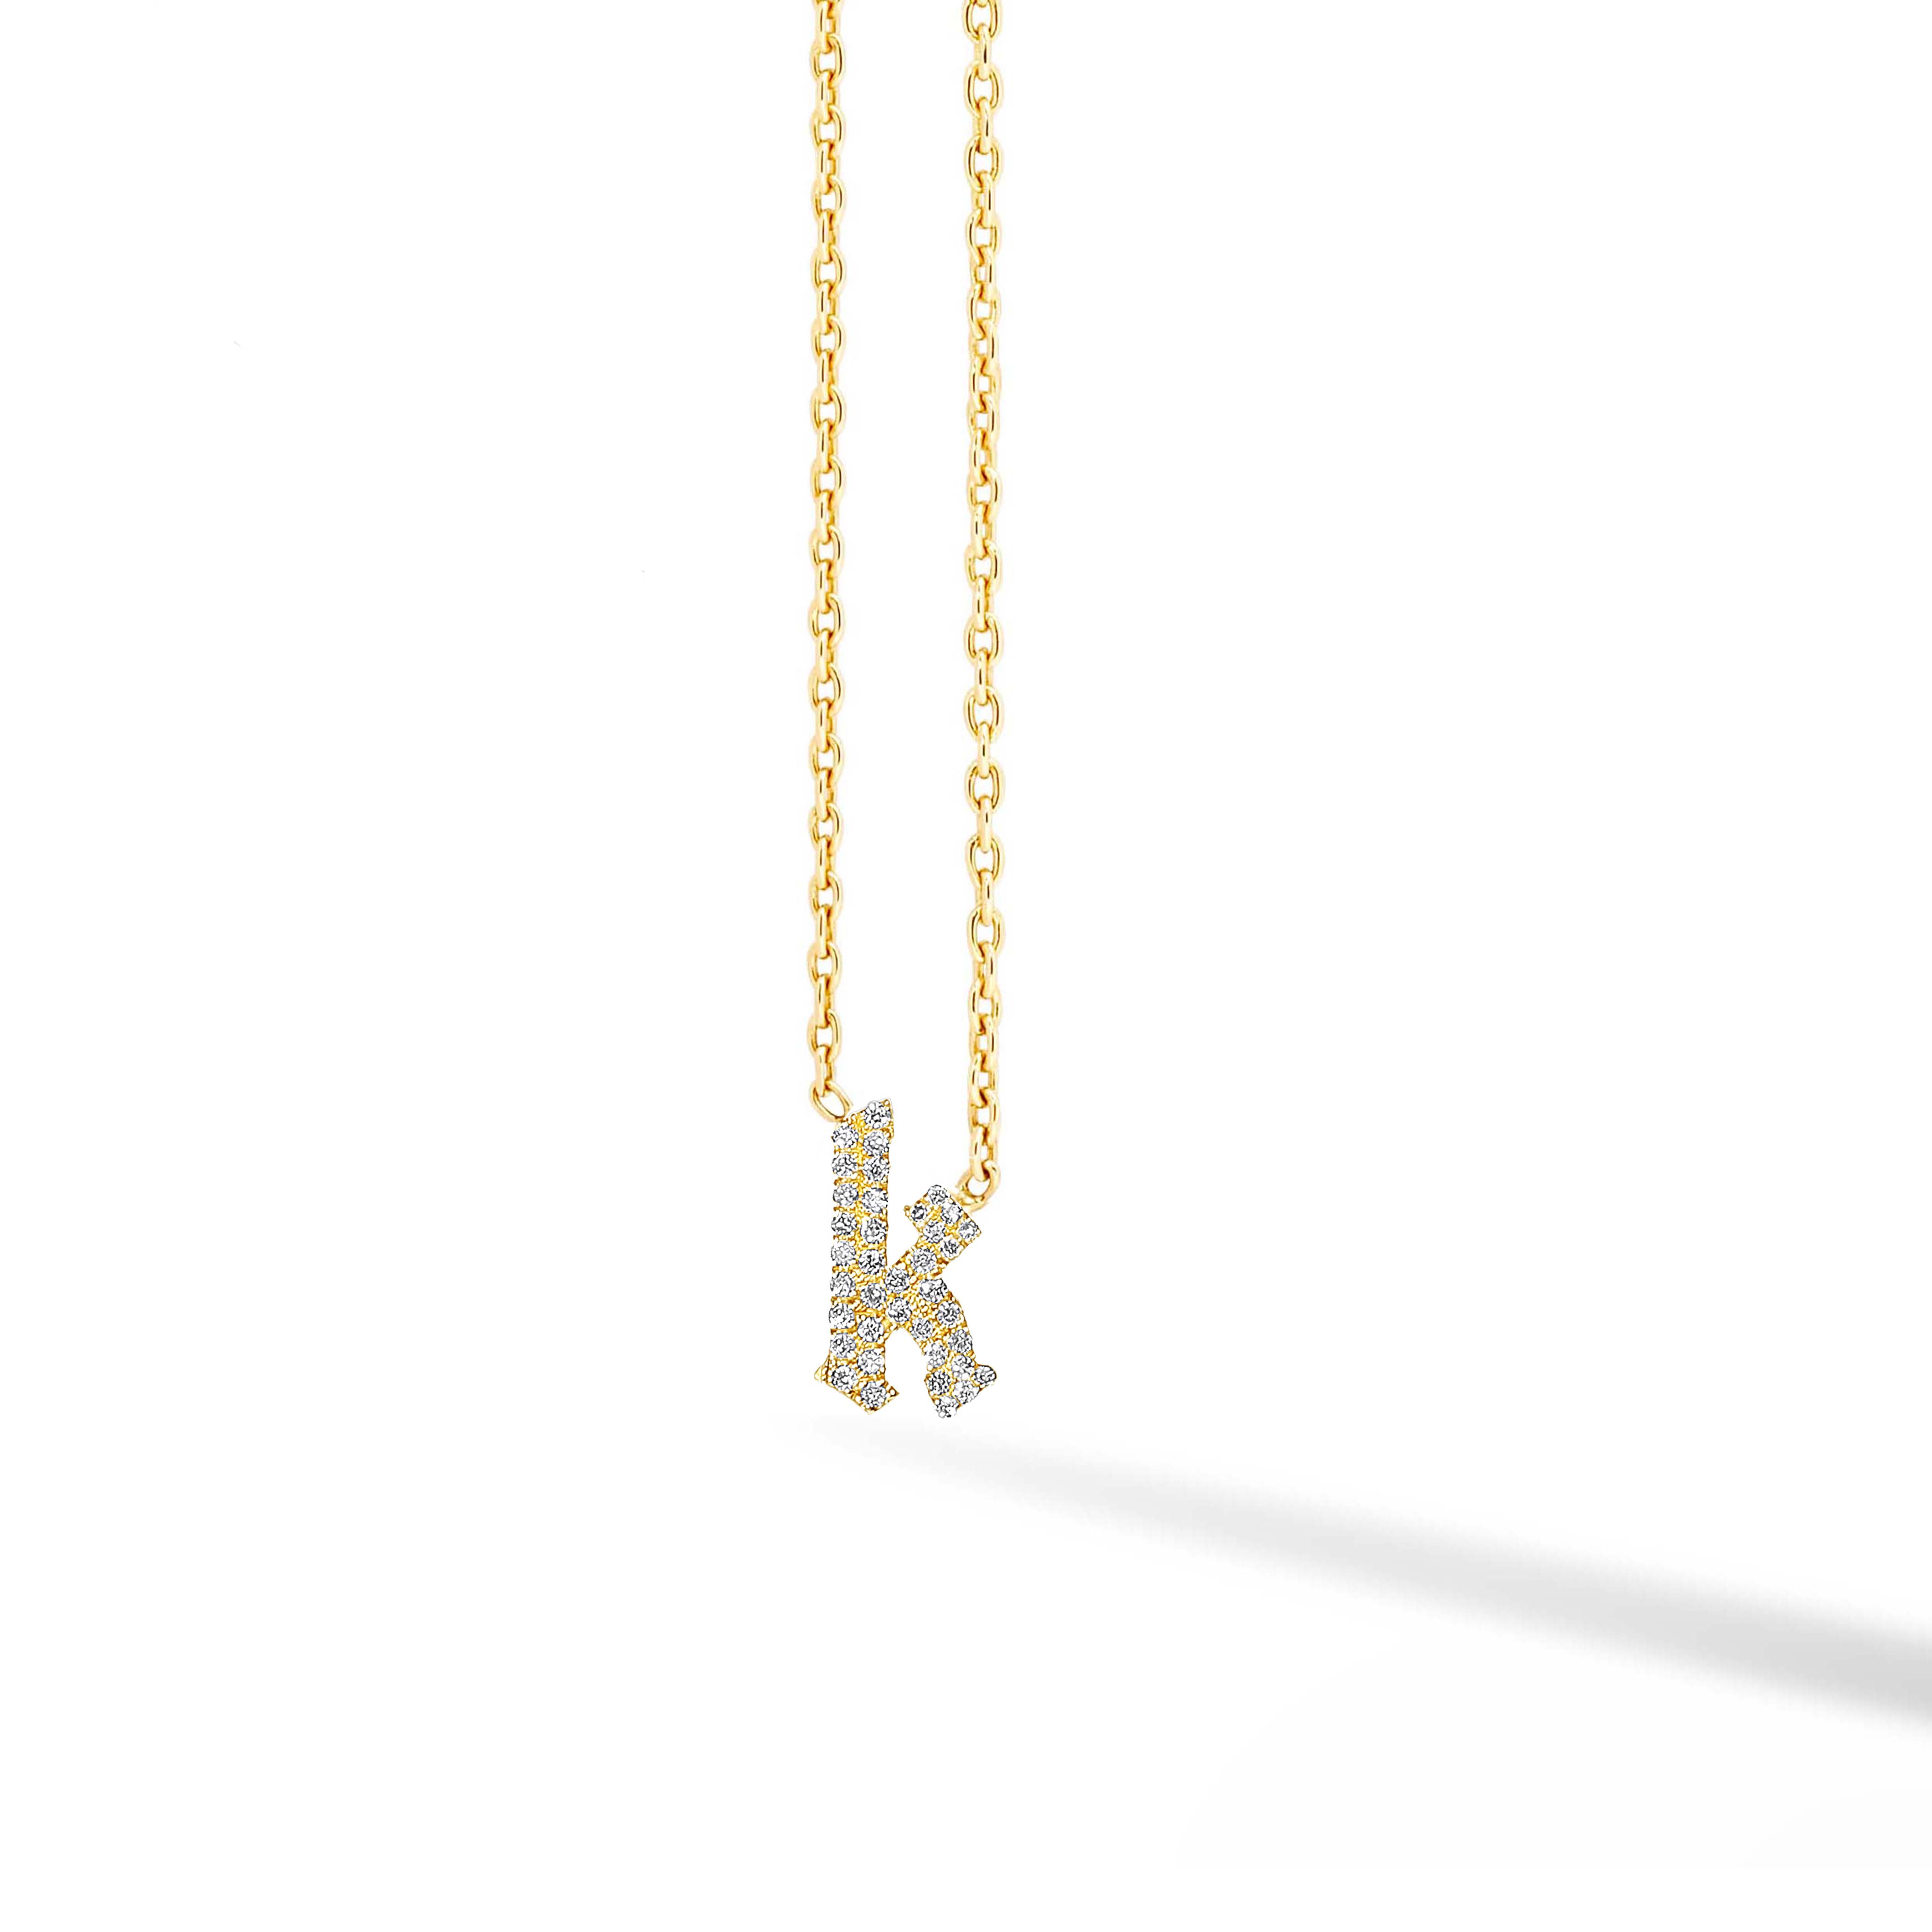 Buy 14K Gold Gothic Initial Necklace Online in India - Etsy